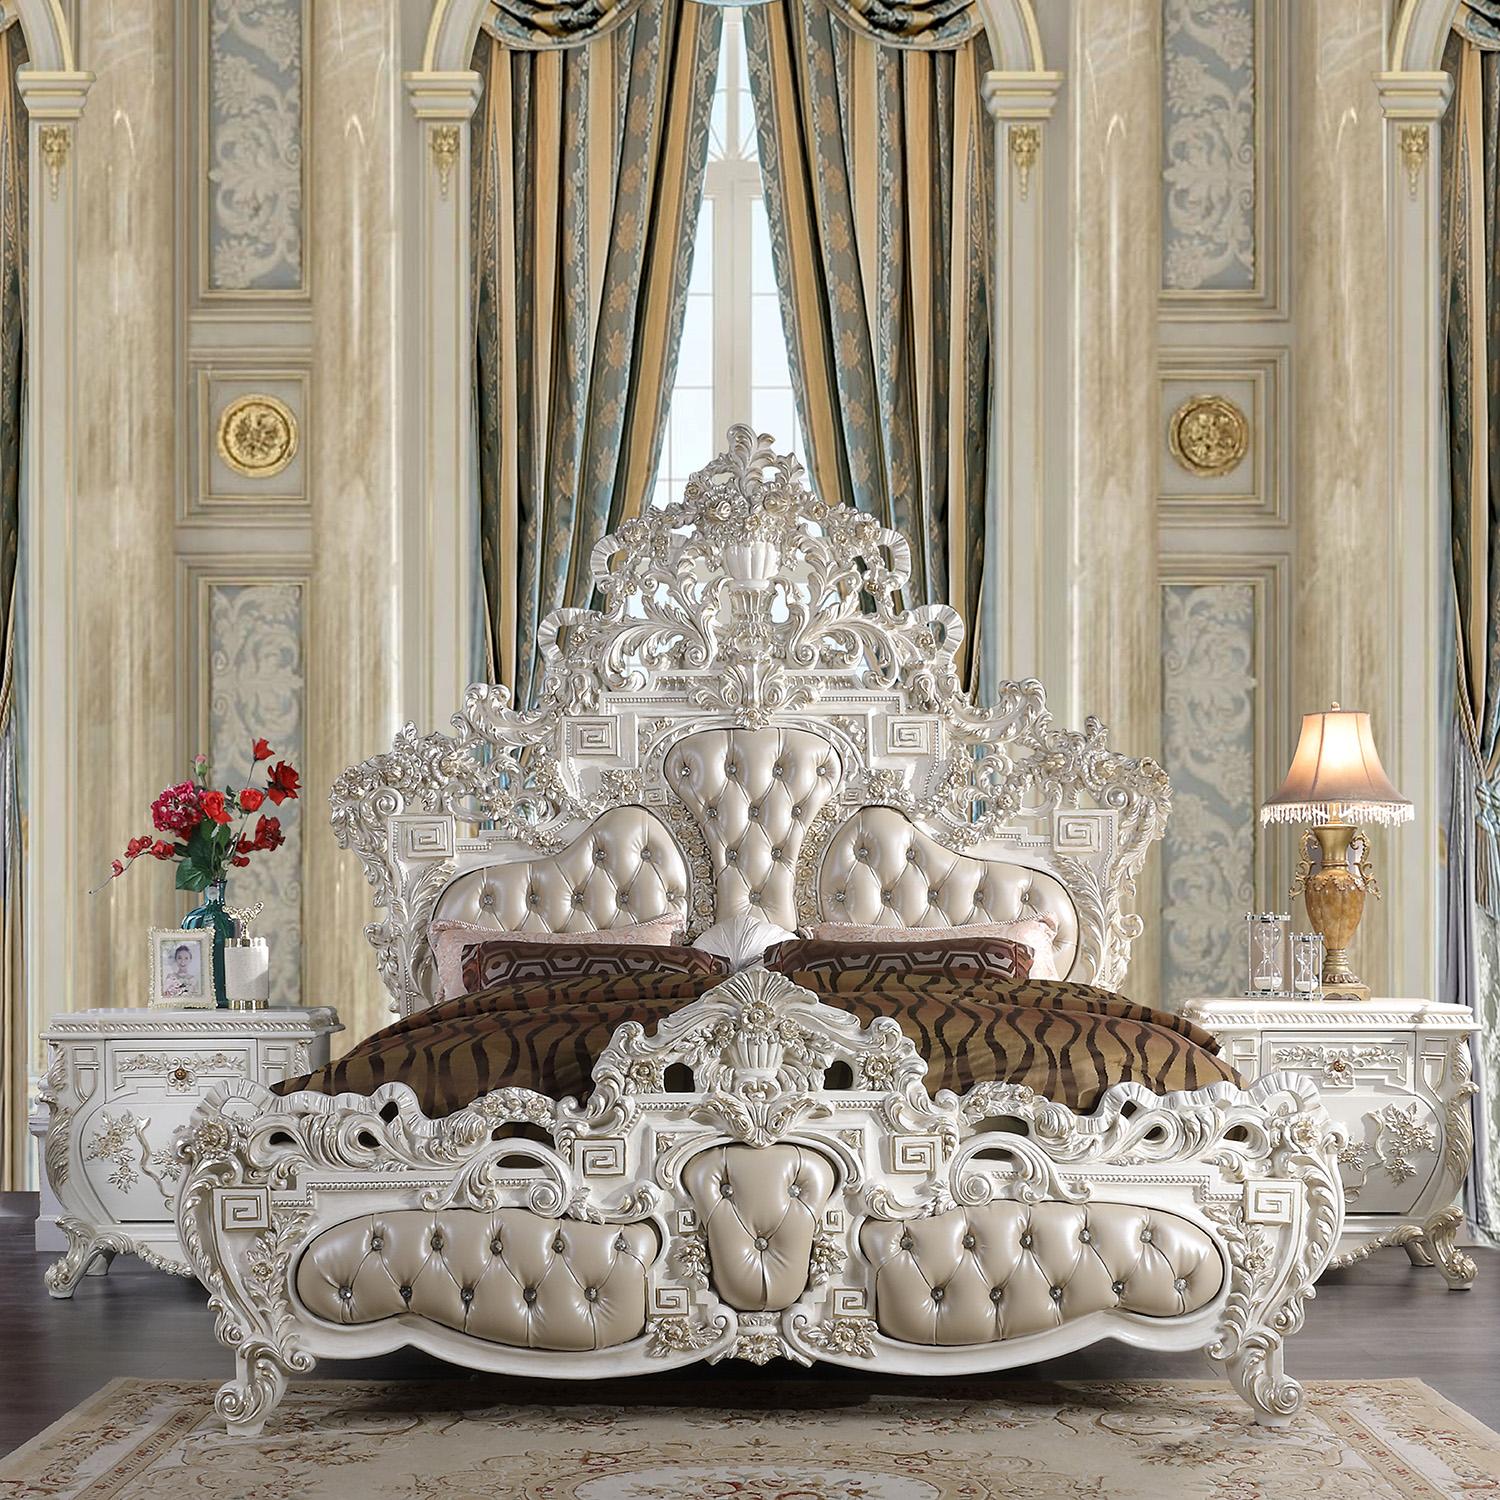 

    
Pearl Cream & White Tufted King Bedroom Set 3Pcs Traditional Homey Design HD-1807
